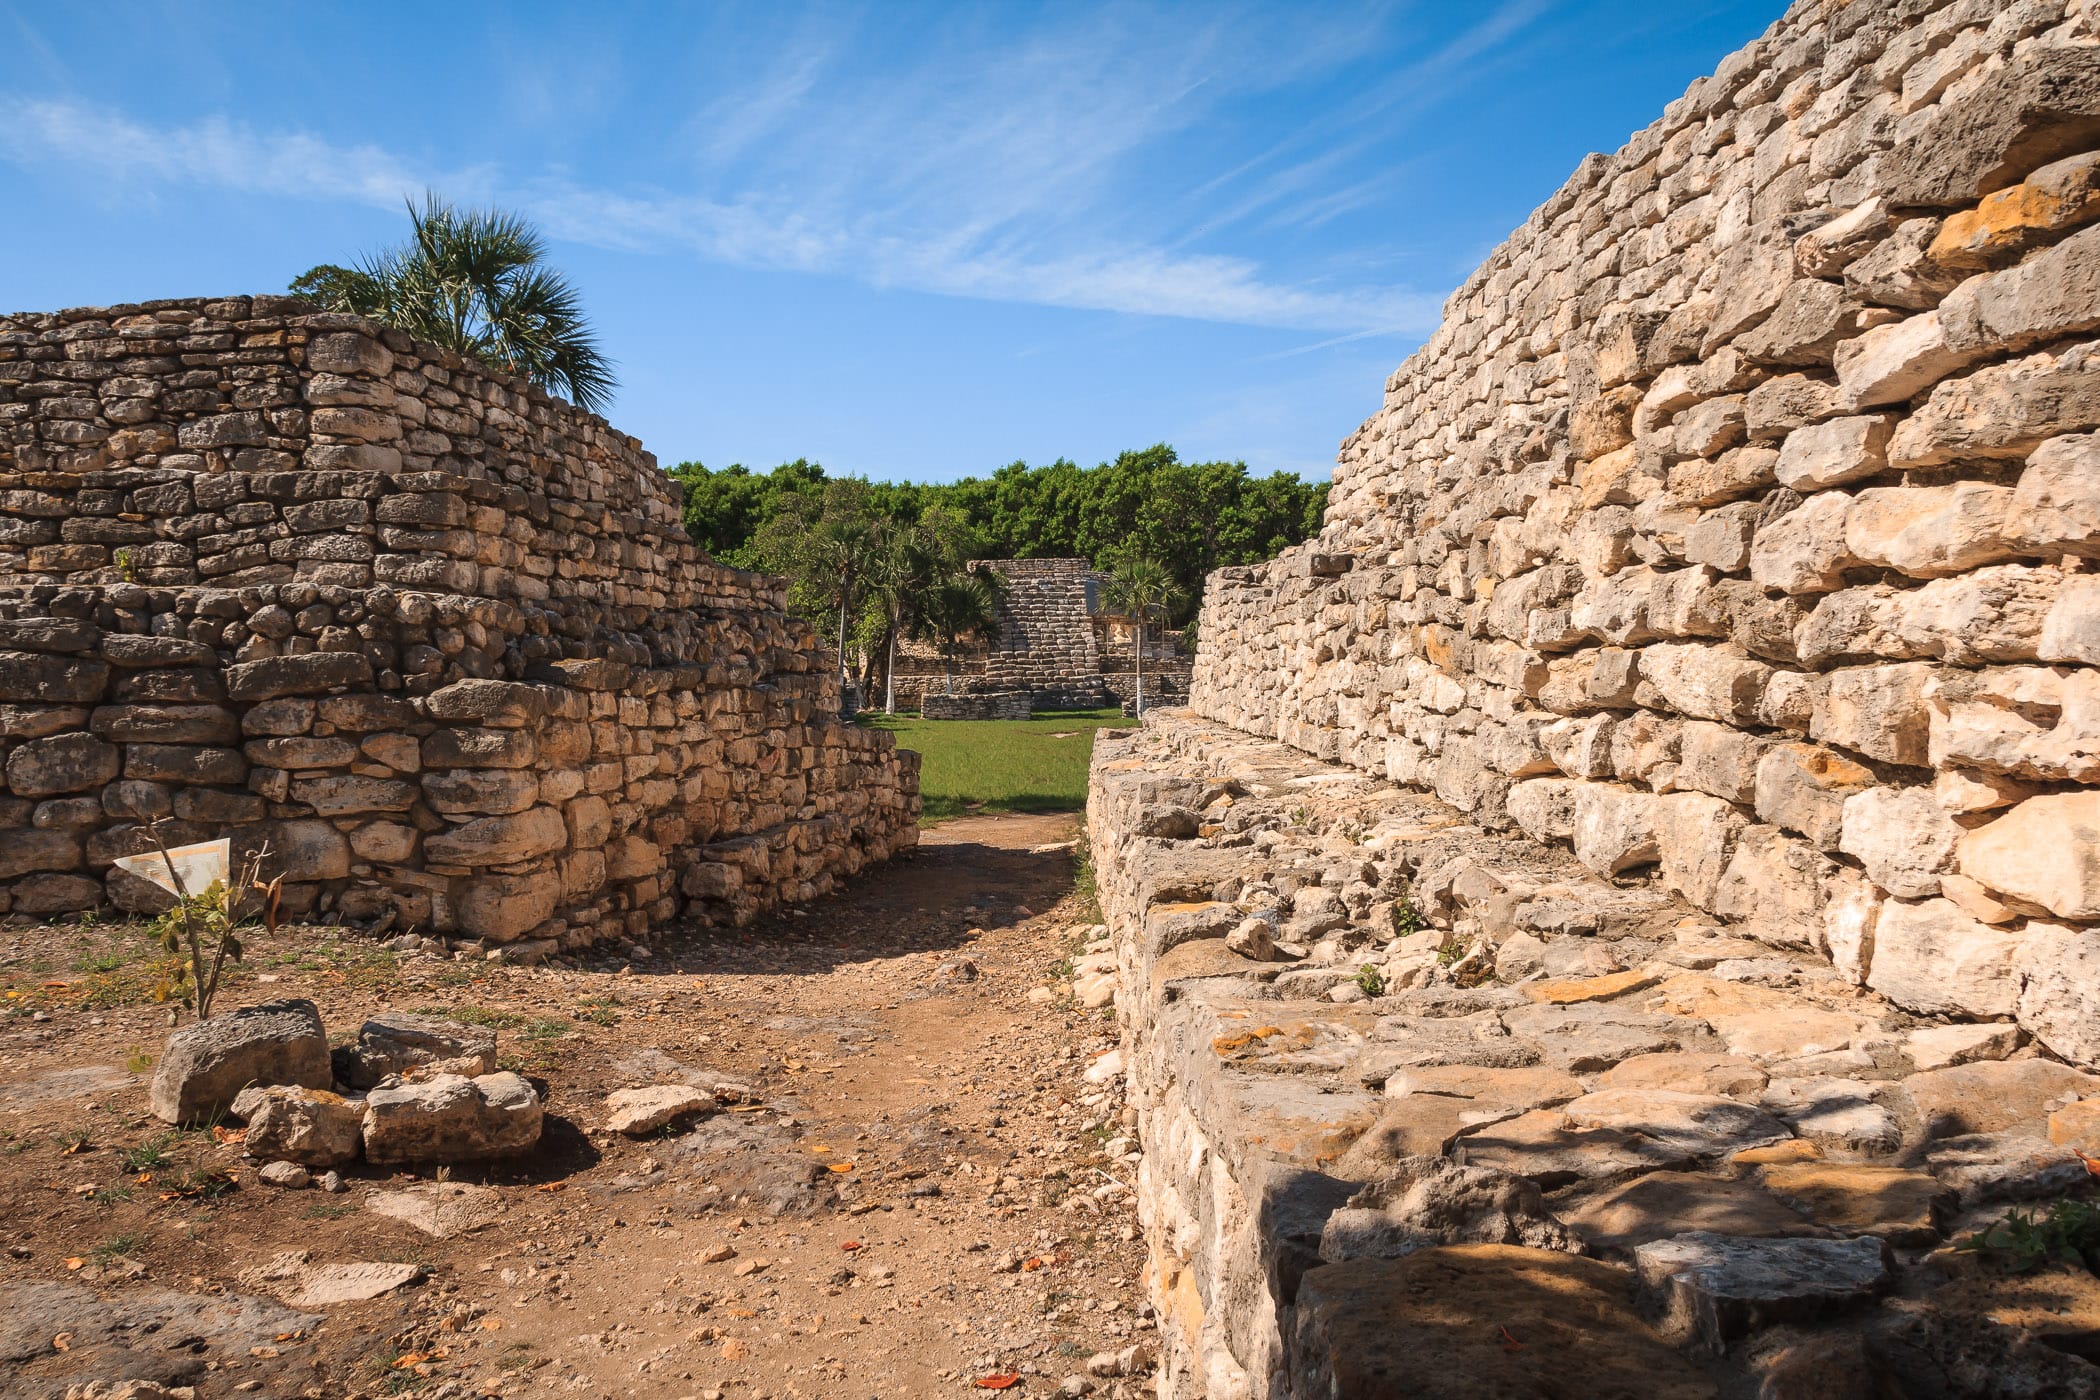 Detail of ruins at the Mayan city of Xcambo in the Mexican state of Yucatan.